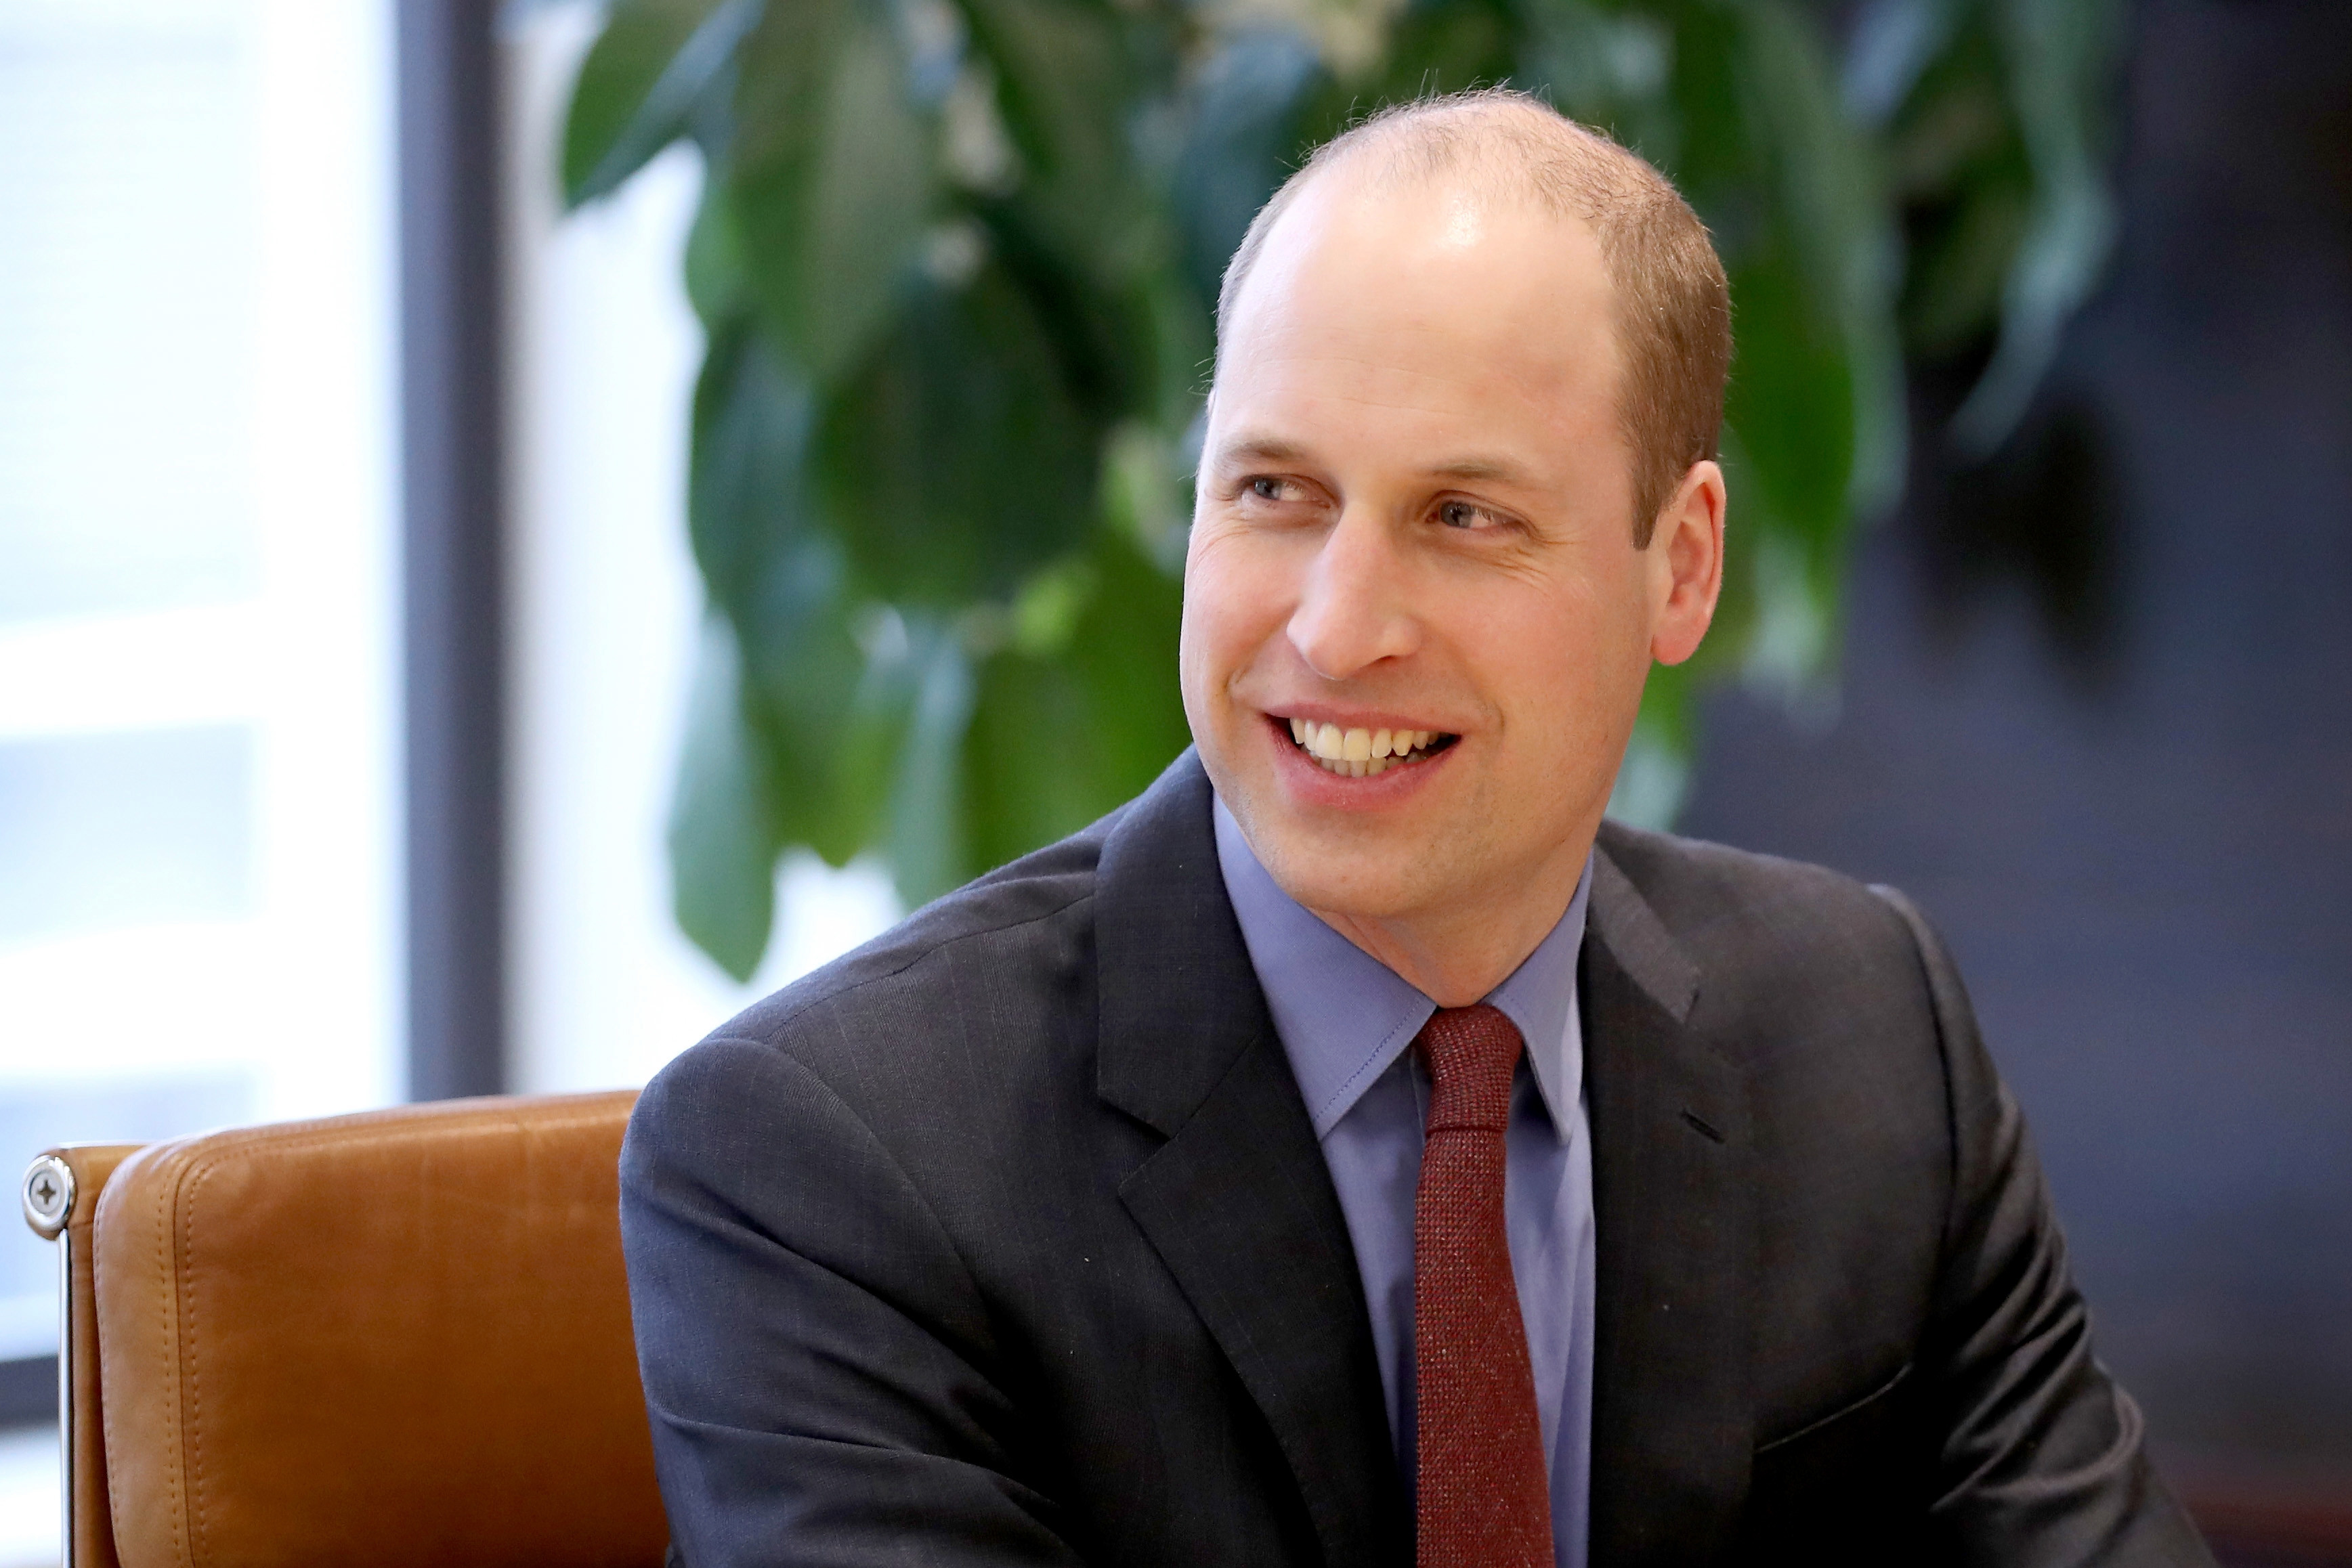 Prince William to make virtual speech at Baftas to celebrate film industry amid pandemic